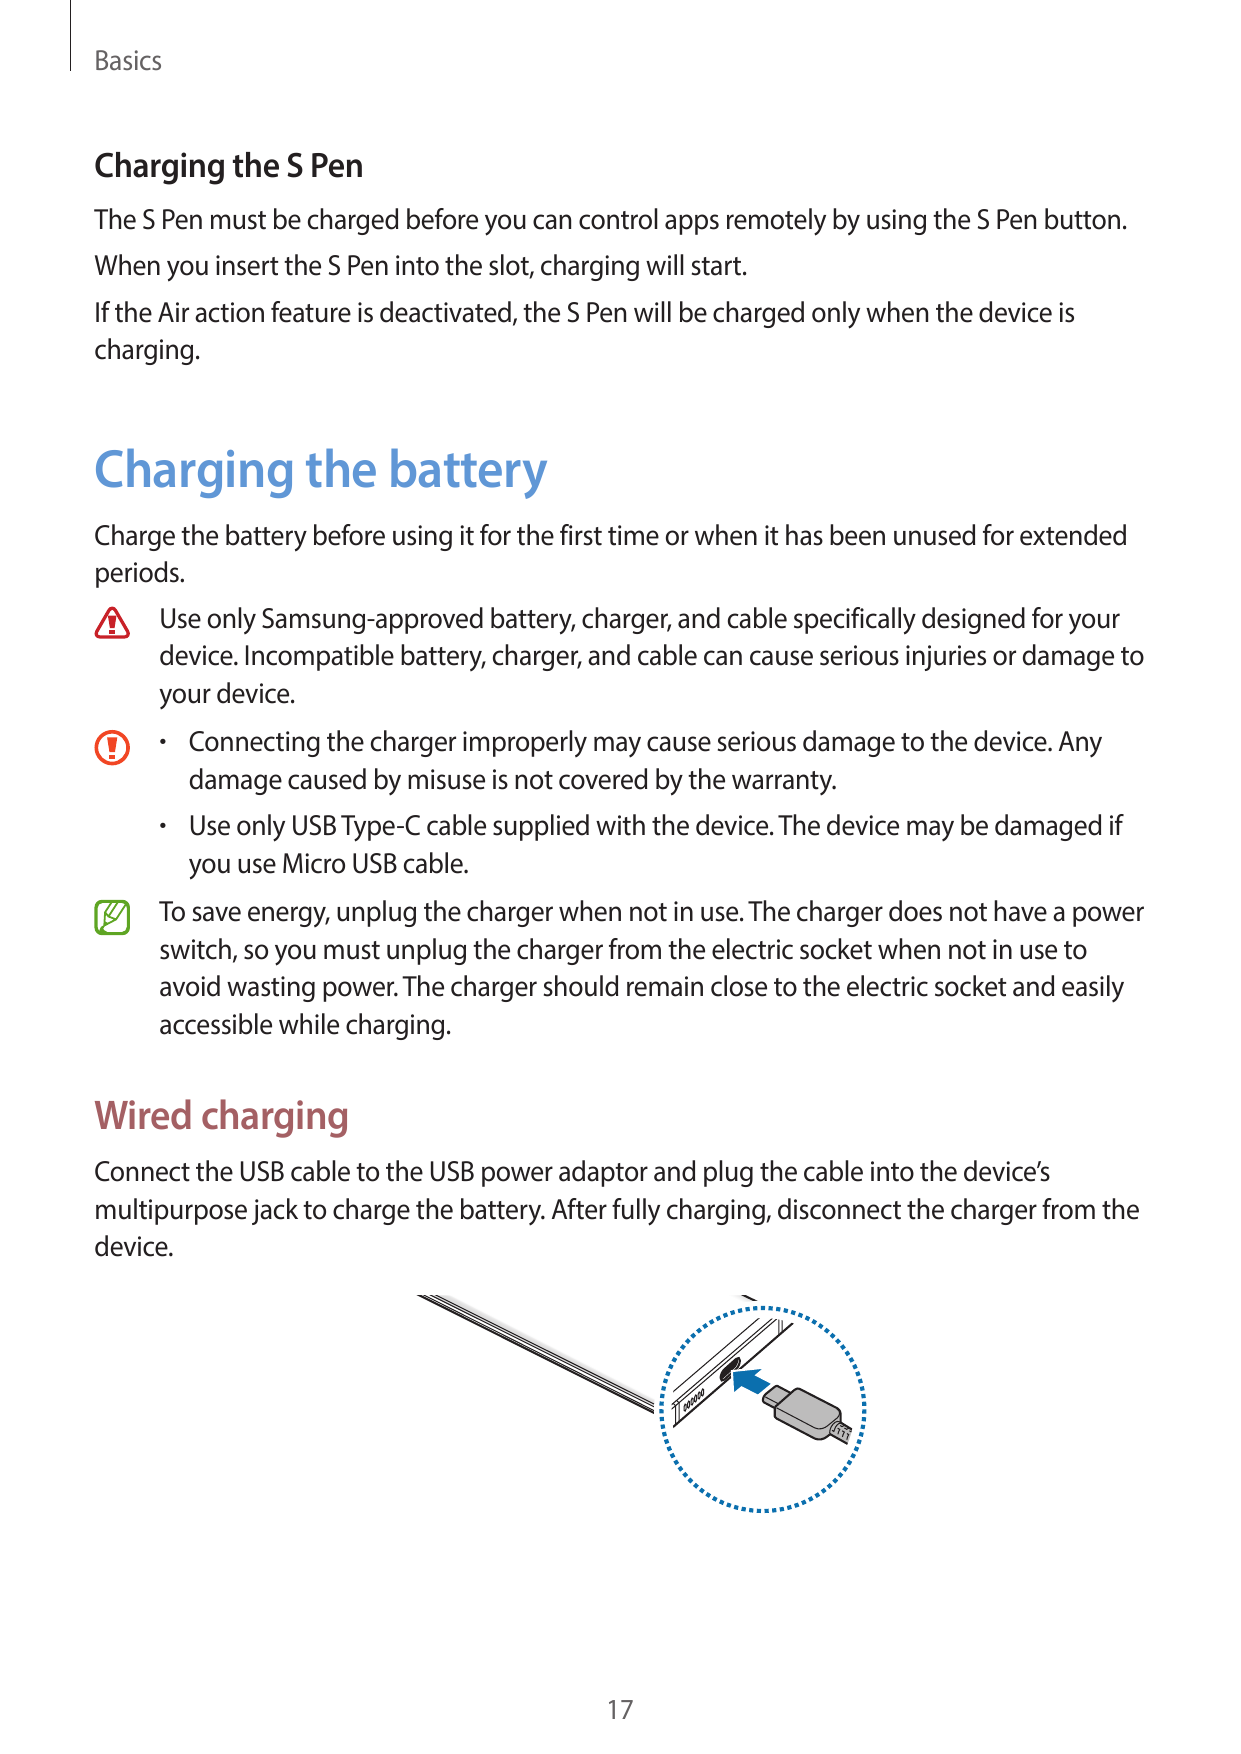 BasicsCharging the S PenThe S Pen must be charged before you can control apps remotely by using the S Pen button.When you insert